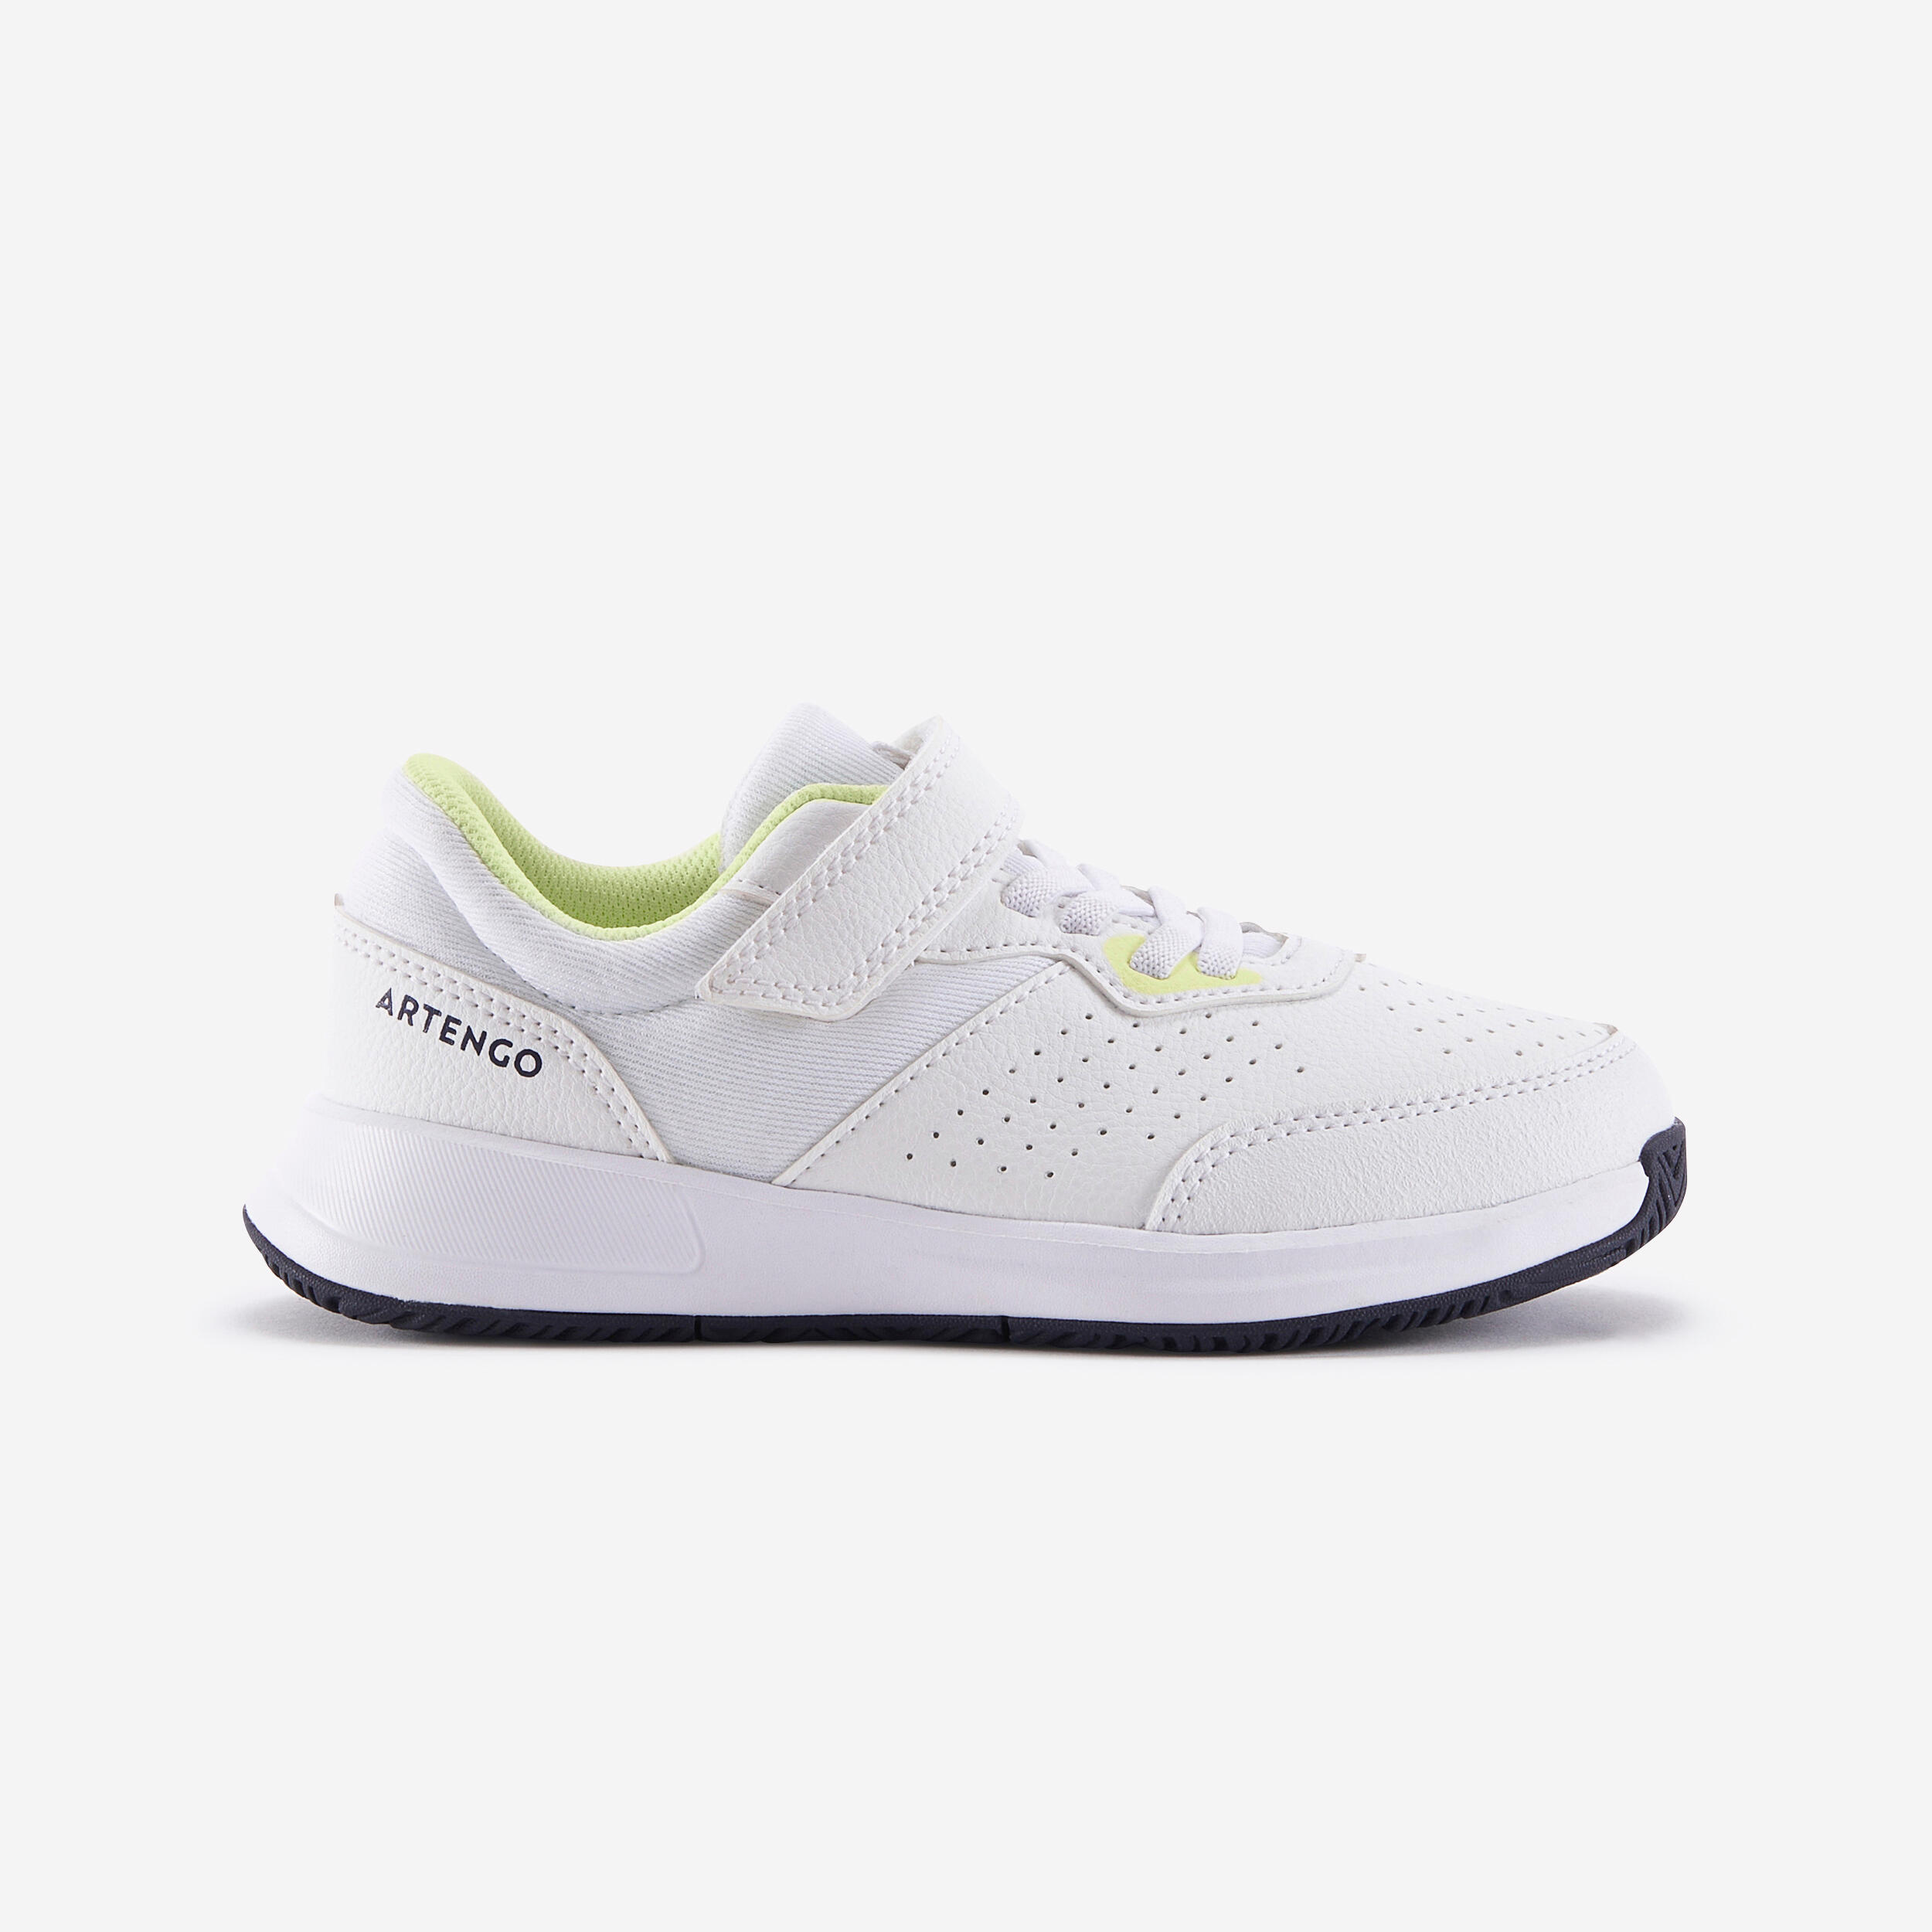 ultra white / fluo pale yellow